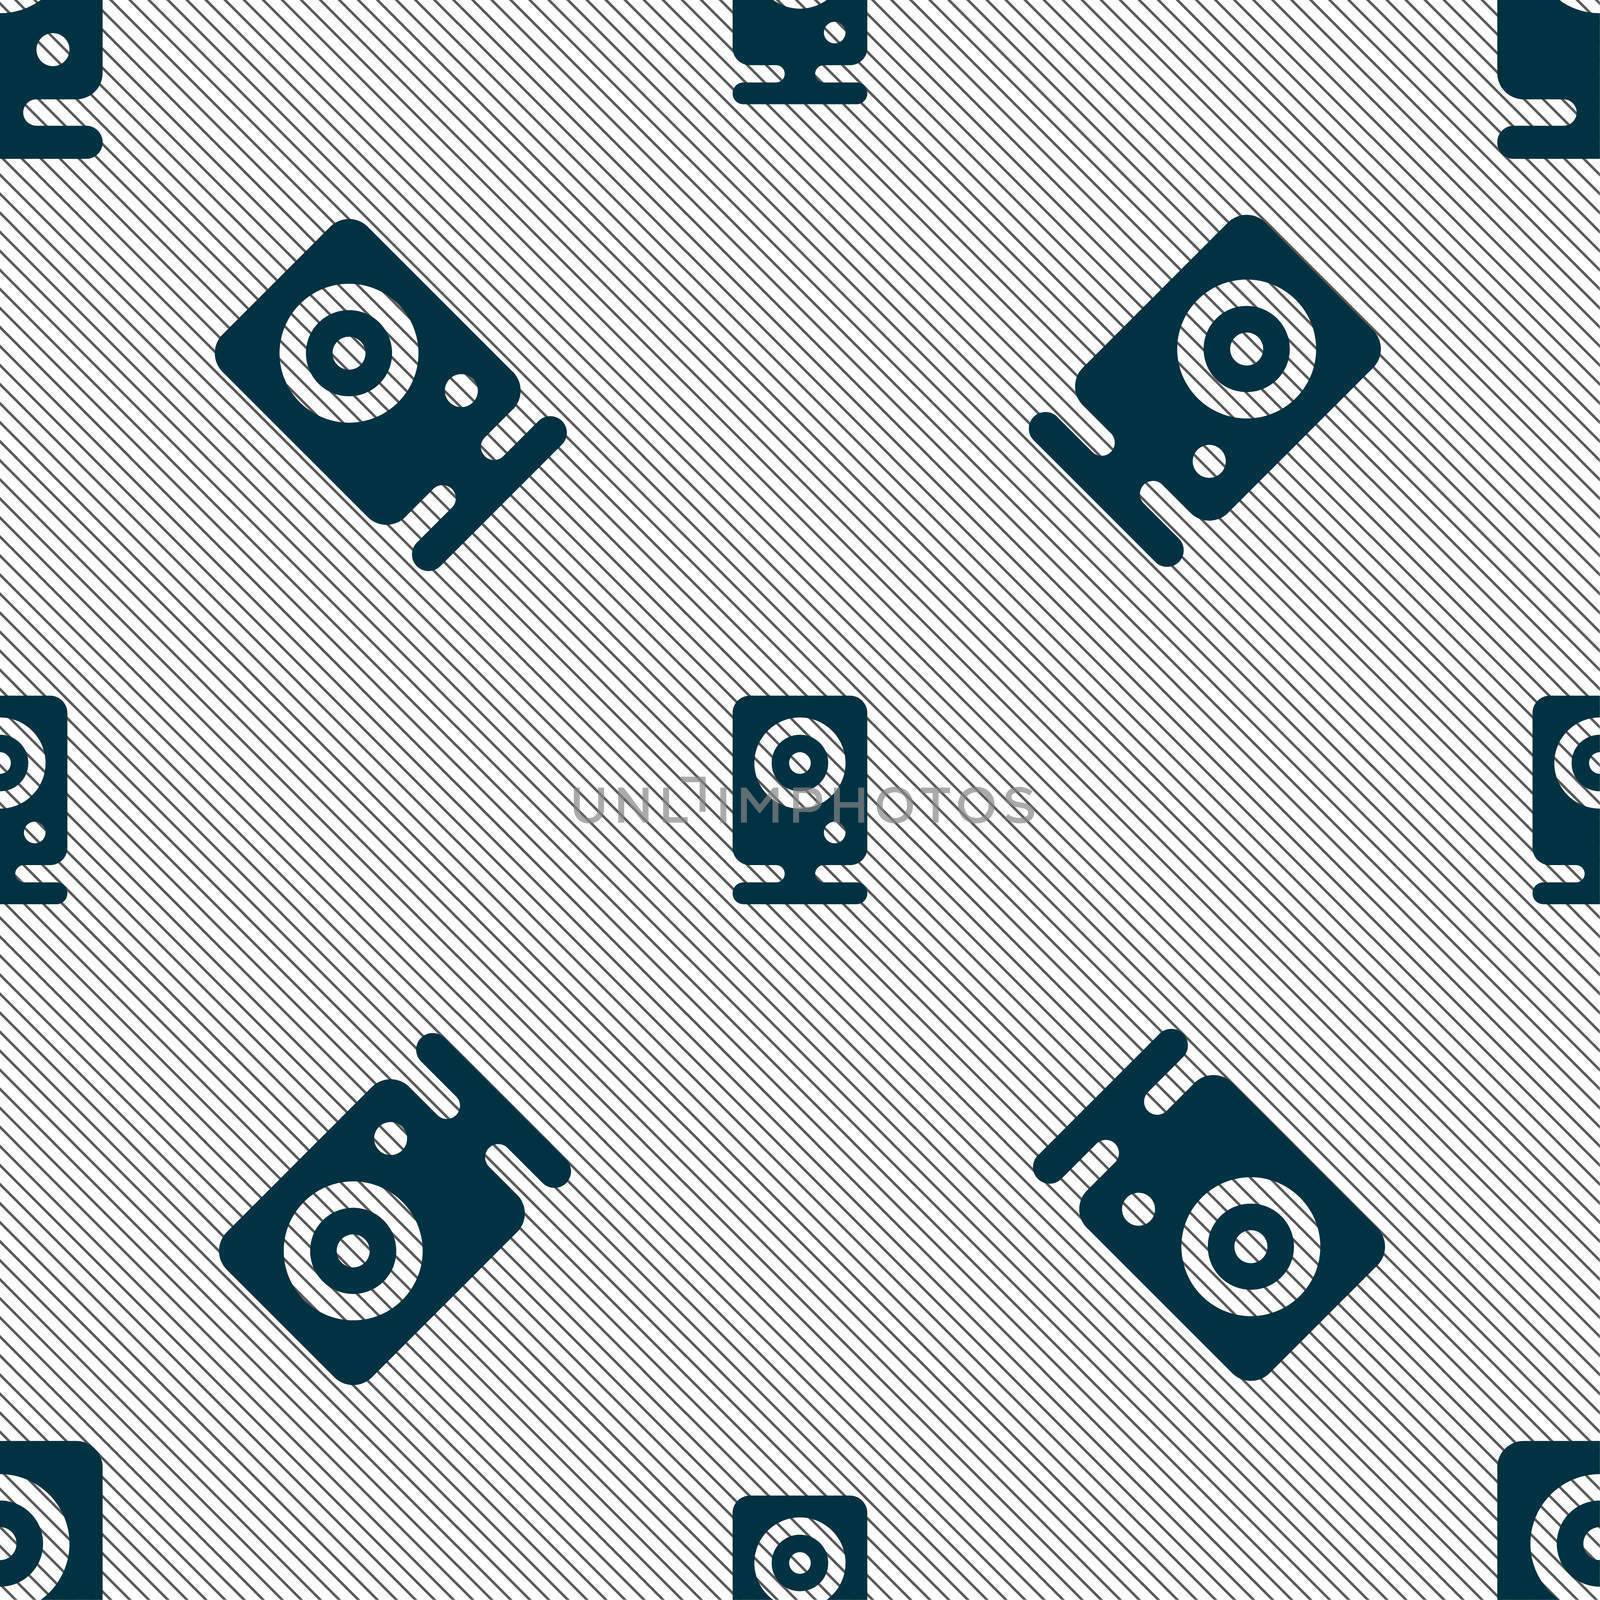 Web cam icon sign. Seamless pattern with geometric texture. illustration